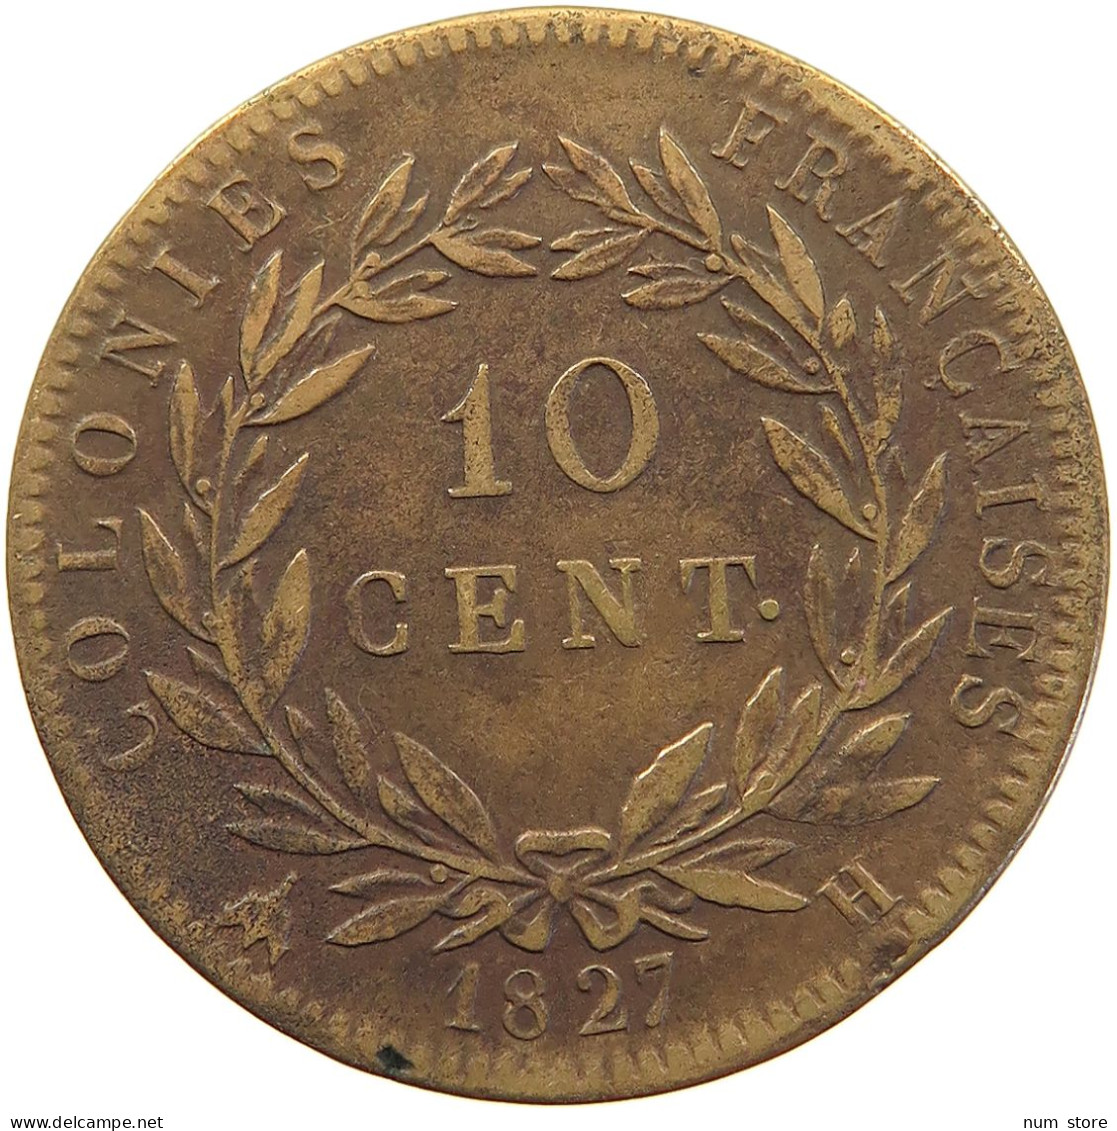 FRENCH COLONIES 10 CENTIMES 1827 H Charles X. (1824-1830) #c059 0147 - Colonias Francesas (1817-1844)